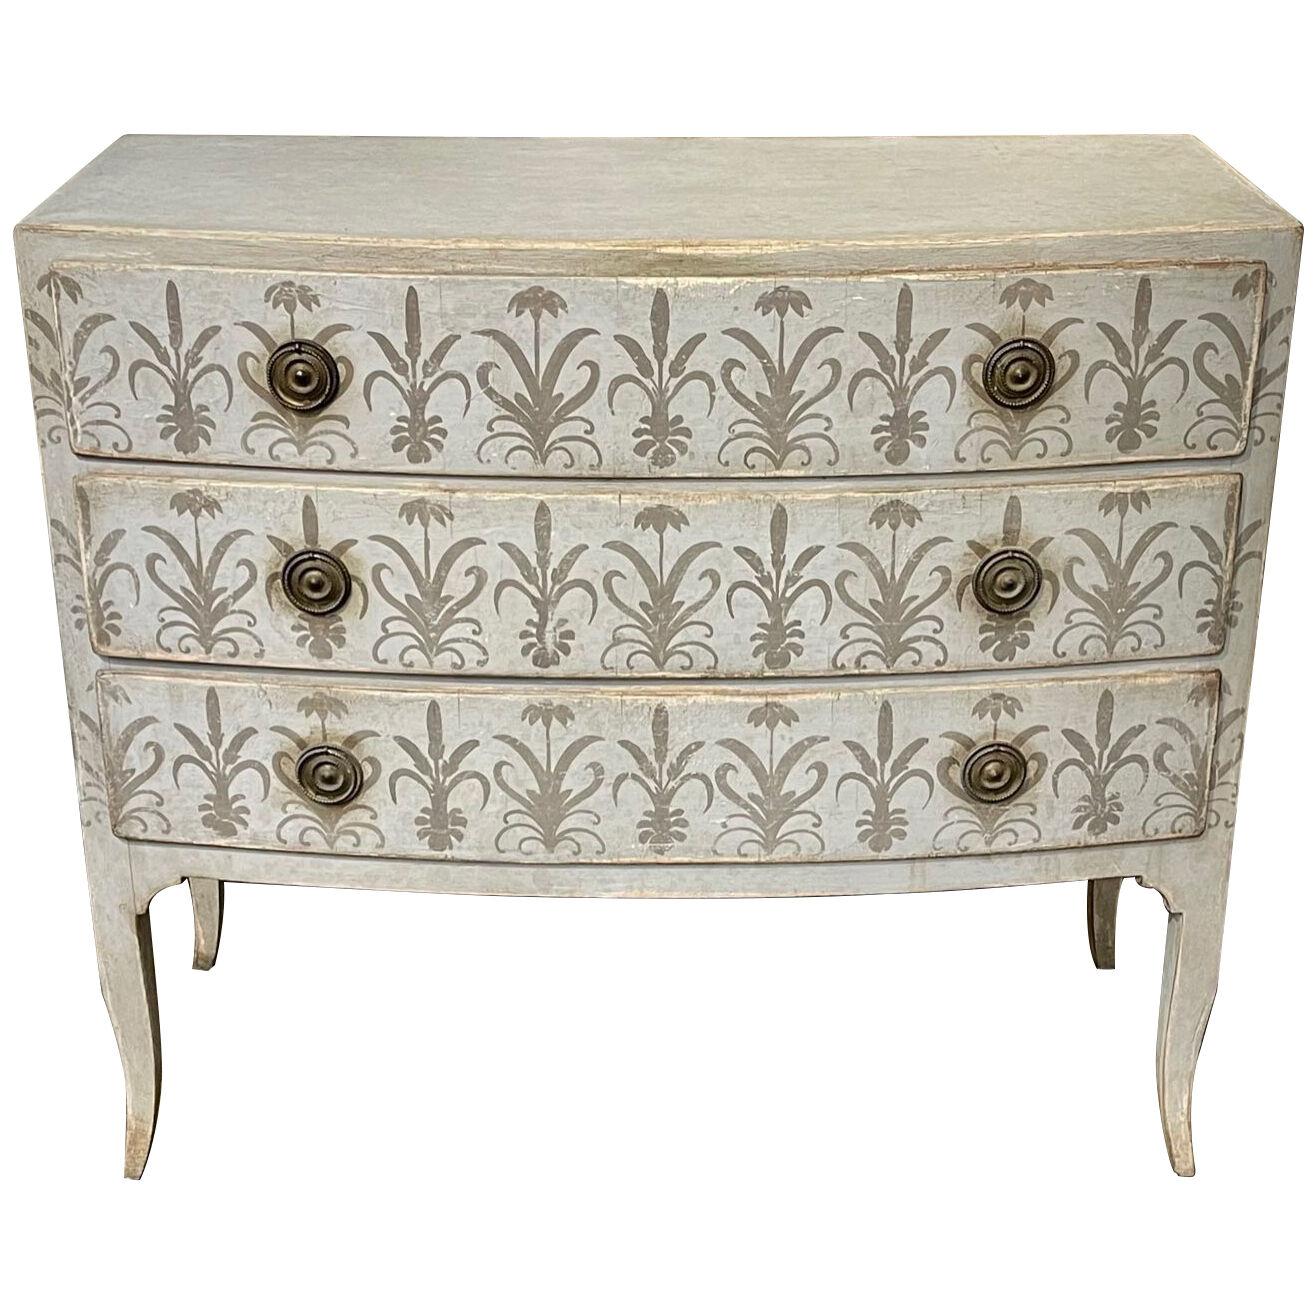 19th Century Italian Neo-Classical Curved Front Painted Commode